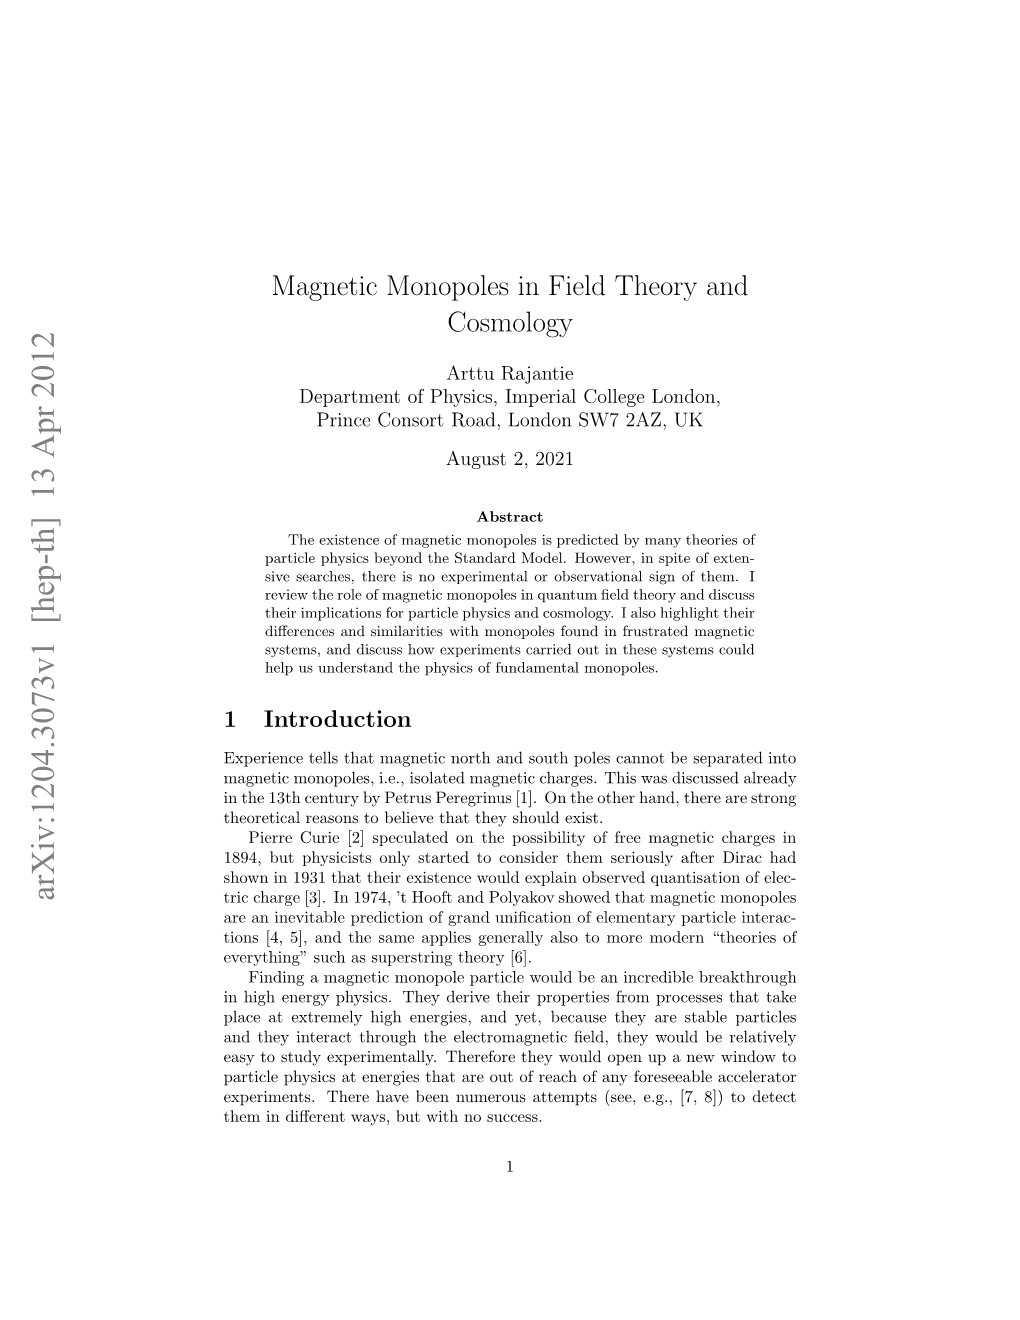 Magnetic Monopoles in Field Theory and Cosmology